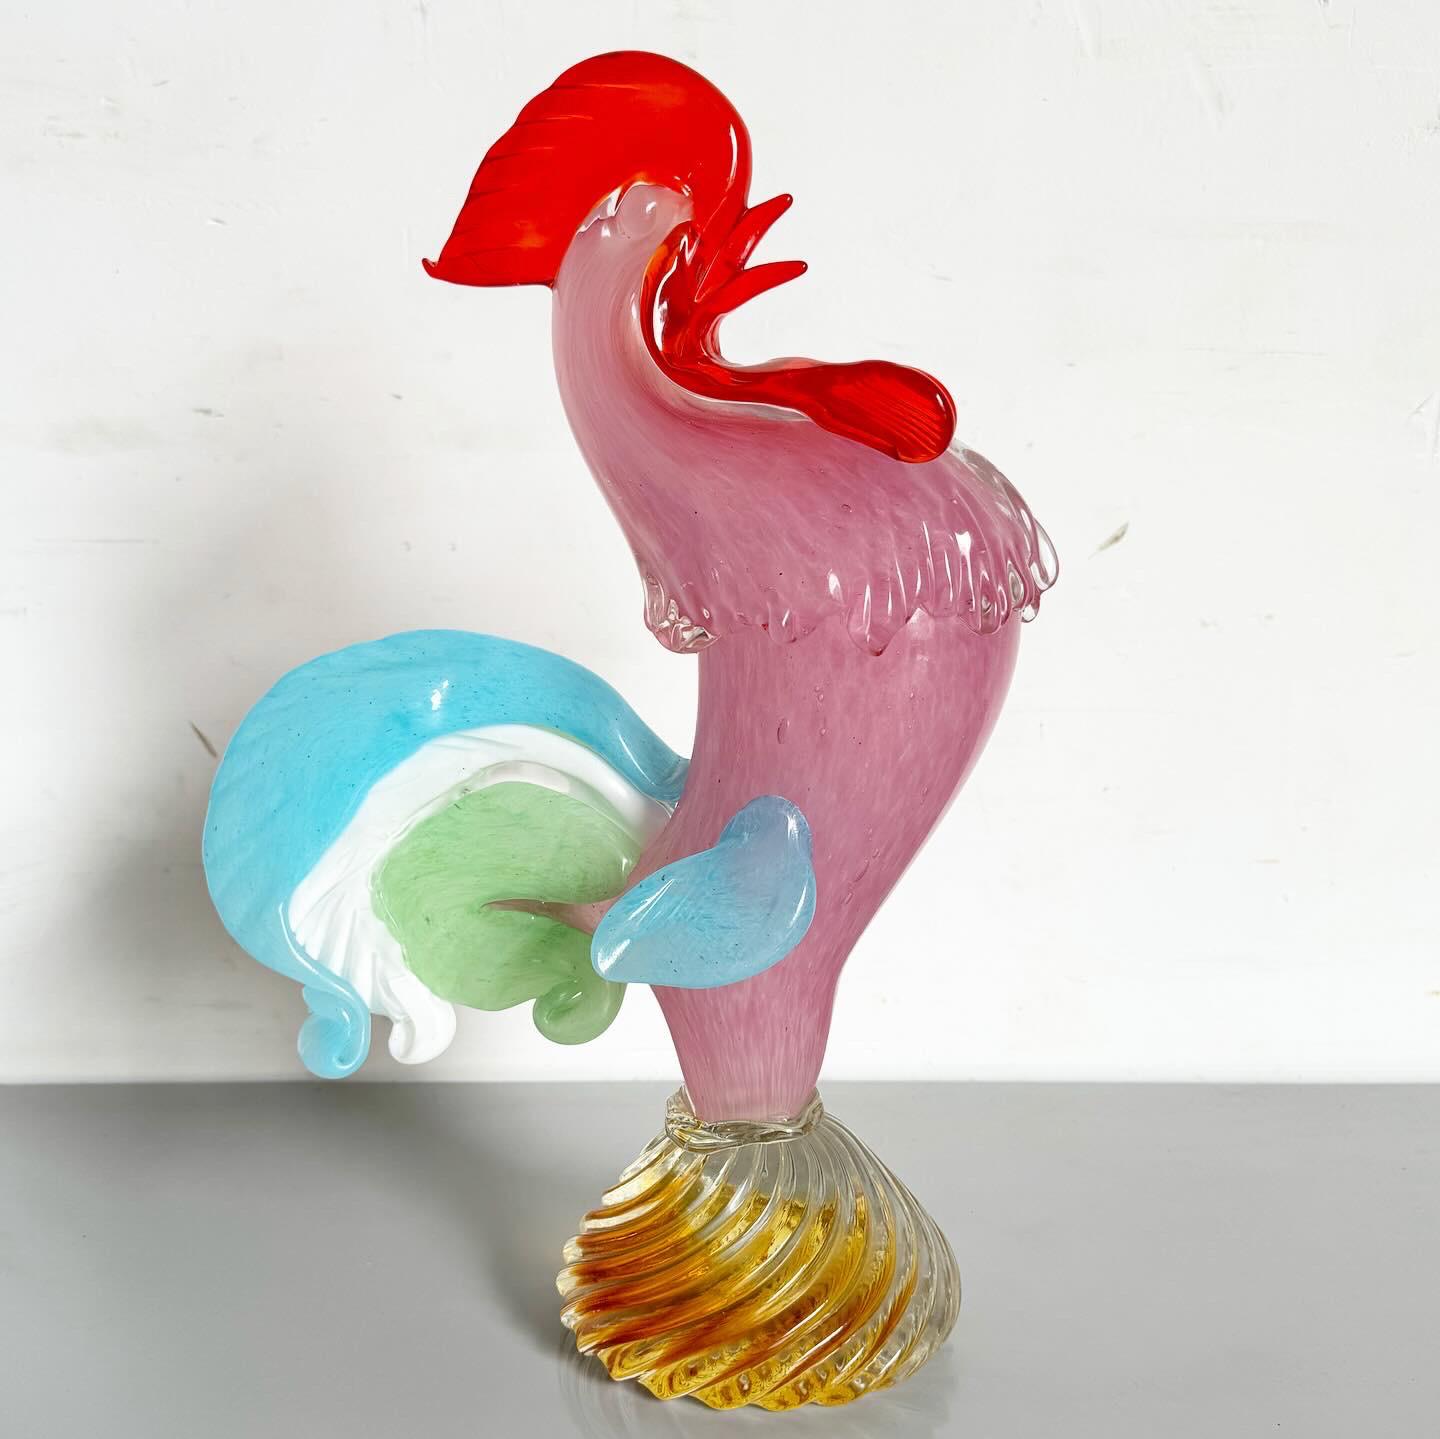 Discover the charm of Post-Modern craftsmanship with this Vintage Hand Blown Murano Glass Rooster. Each aspect of this colorful rooster is meticulously crafted, displaying the unique colors and patterns synonymous with Murano glass art. Its dynamic,